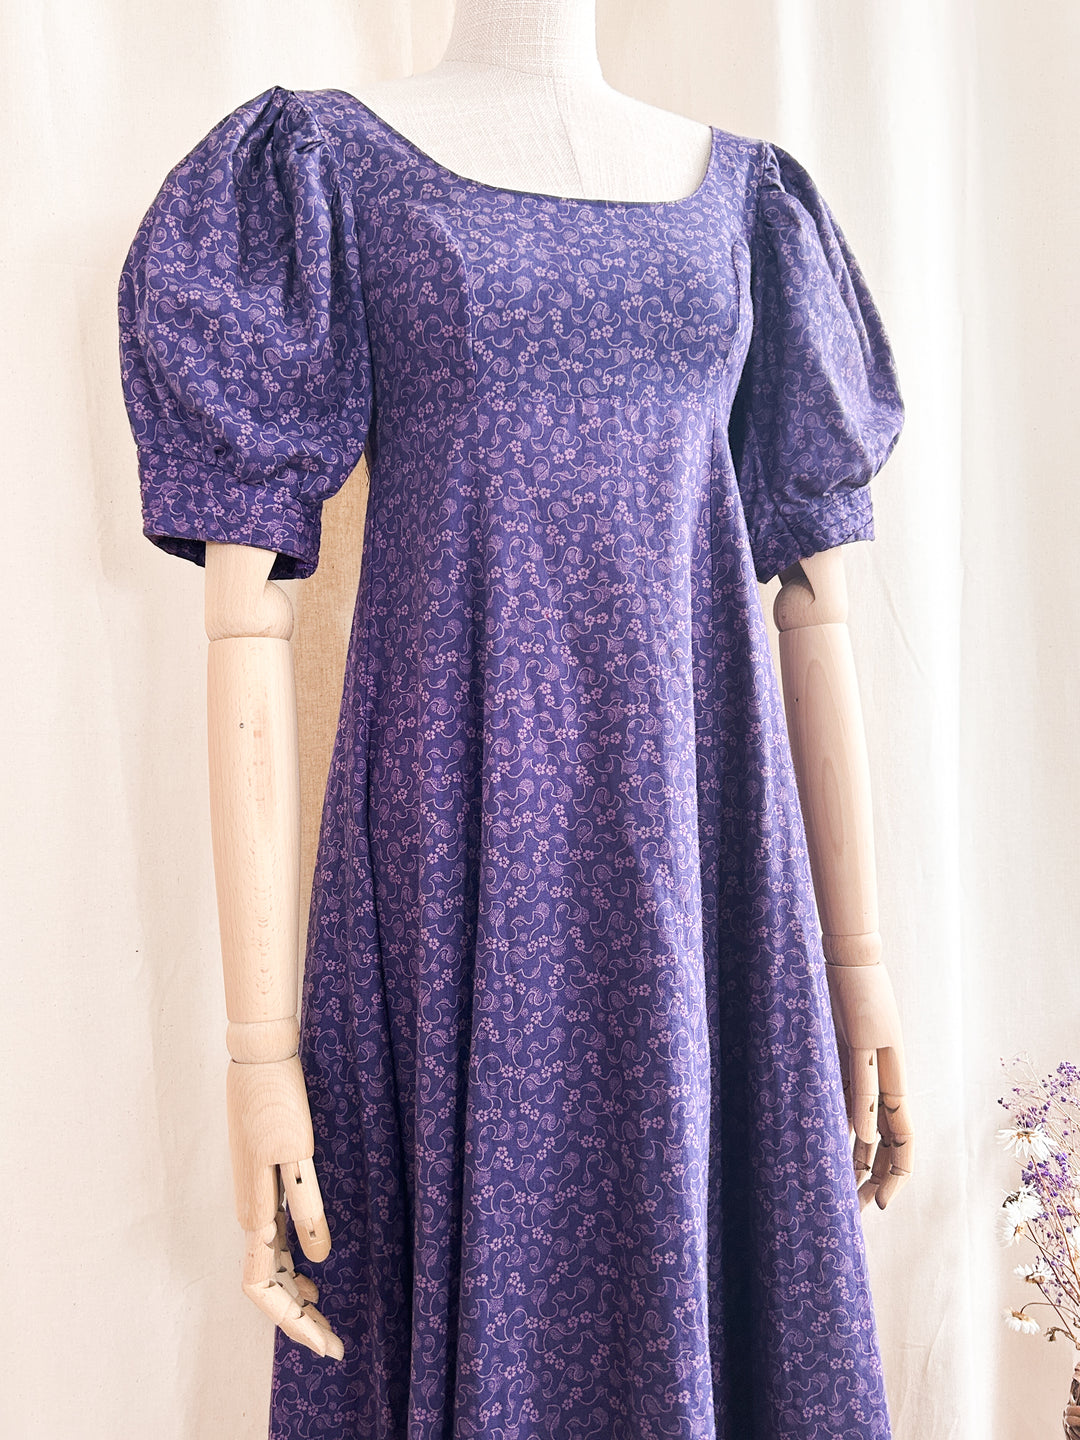 Darcy ~ Holy Grail rare 1970s puff sleeve regency dress by laura ashley